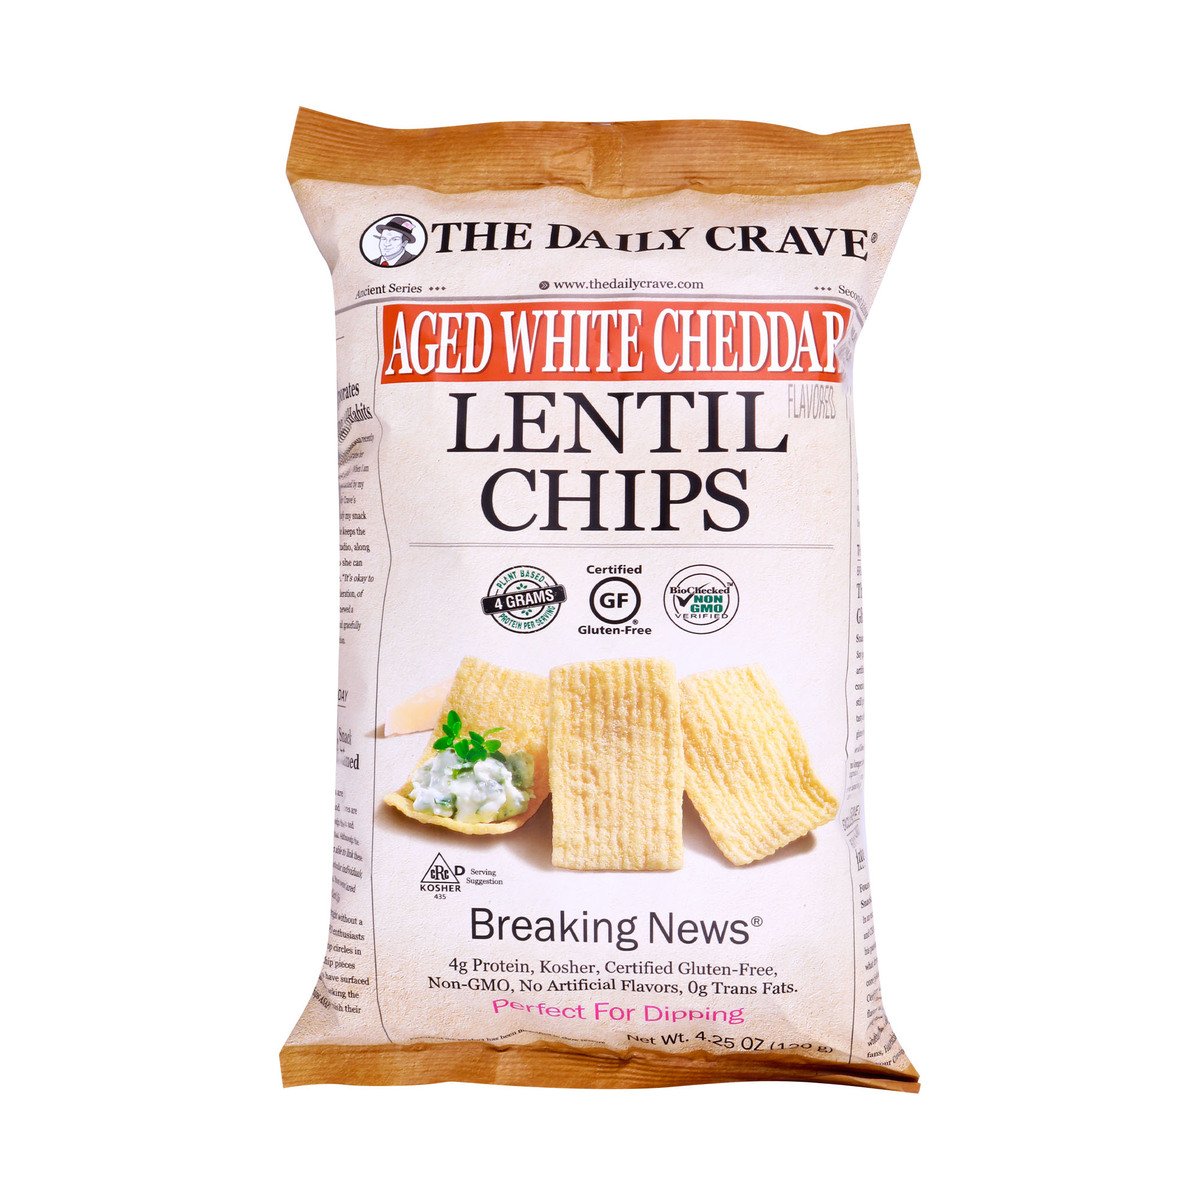 The Daily Crave Lentil Chips Aged White Cheddar 4.25 oz